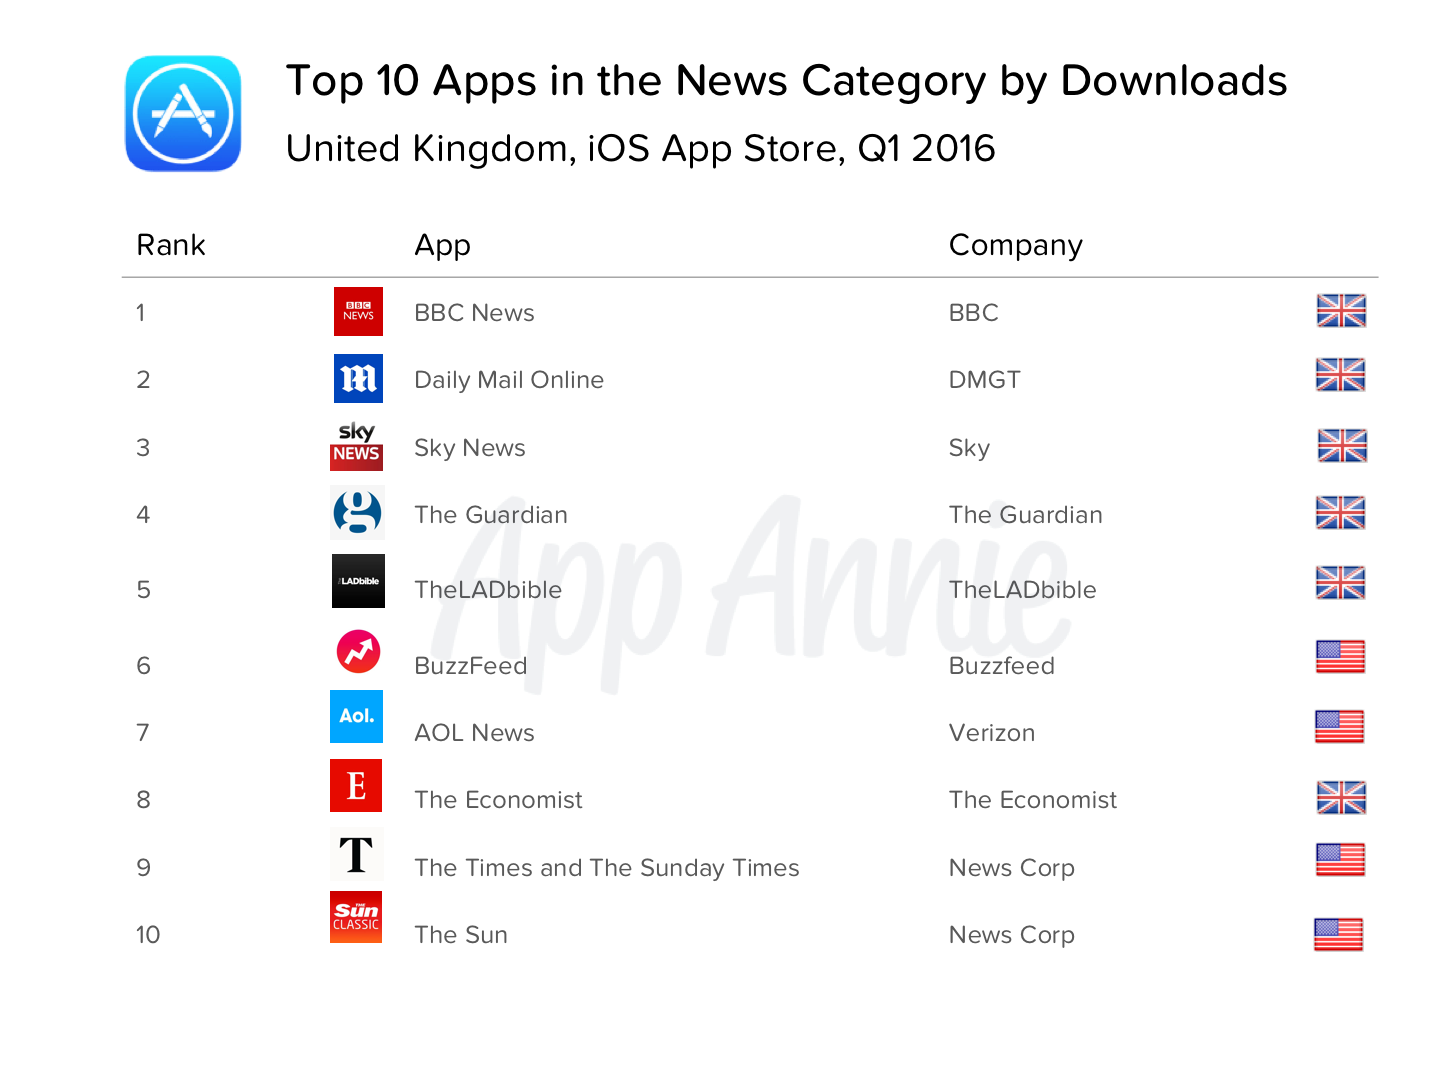 Top 10 Apps in the News Category by Downloads United Kingdom iOS App Store Q1 2016